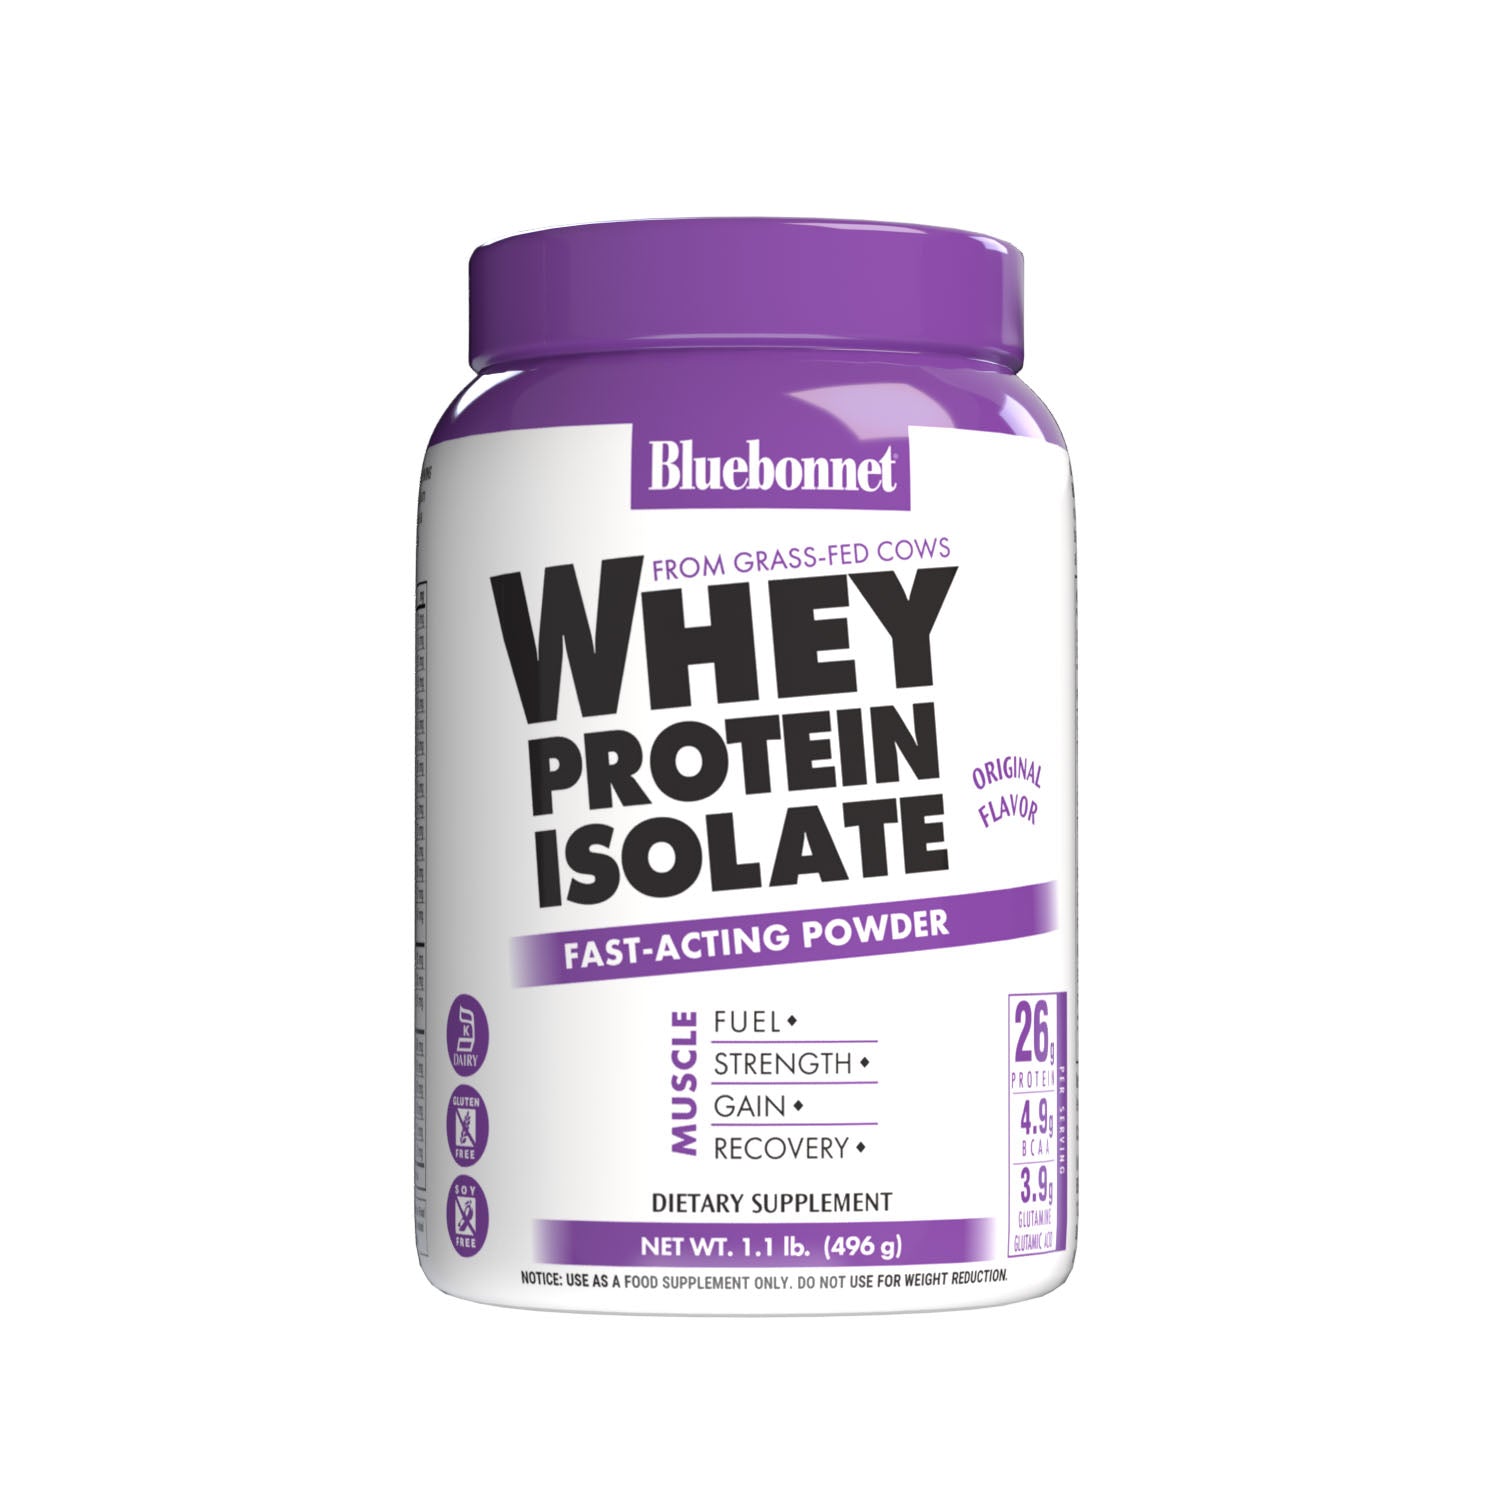 Bluebonnet's Whey Protein Isolate Powder. Original flavor. 26 g of protein, 4.9 g BCAA and 3.9 g Glutamine Glutamic Acid per serving. Front panel. #size_1.1 lb